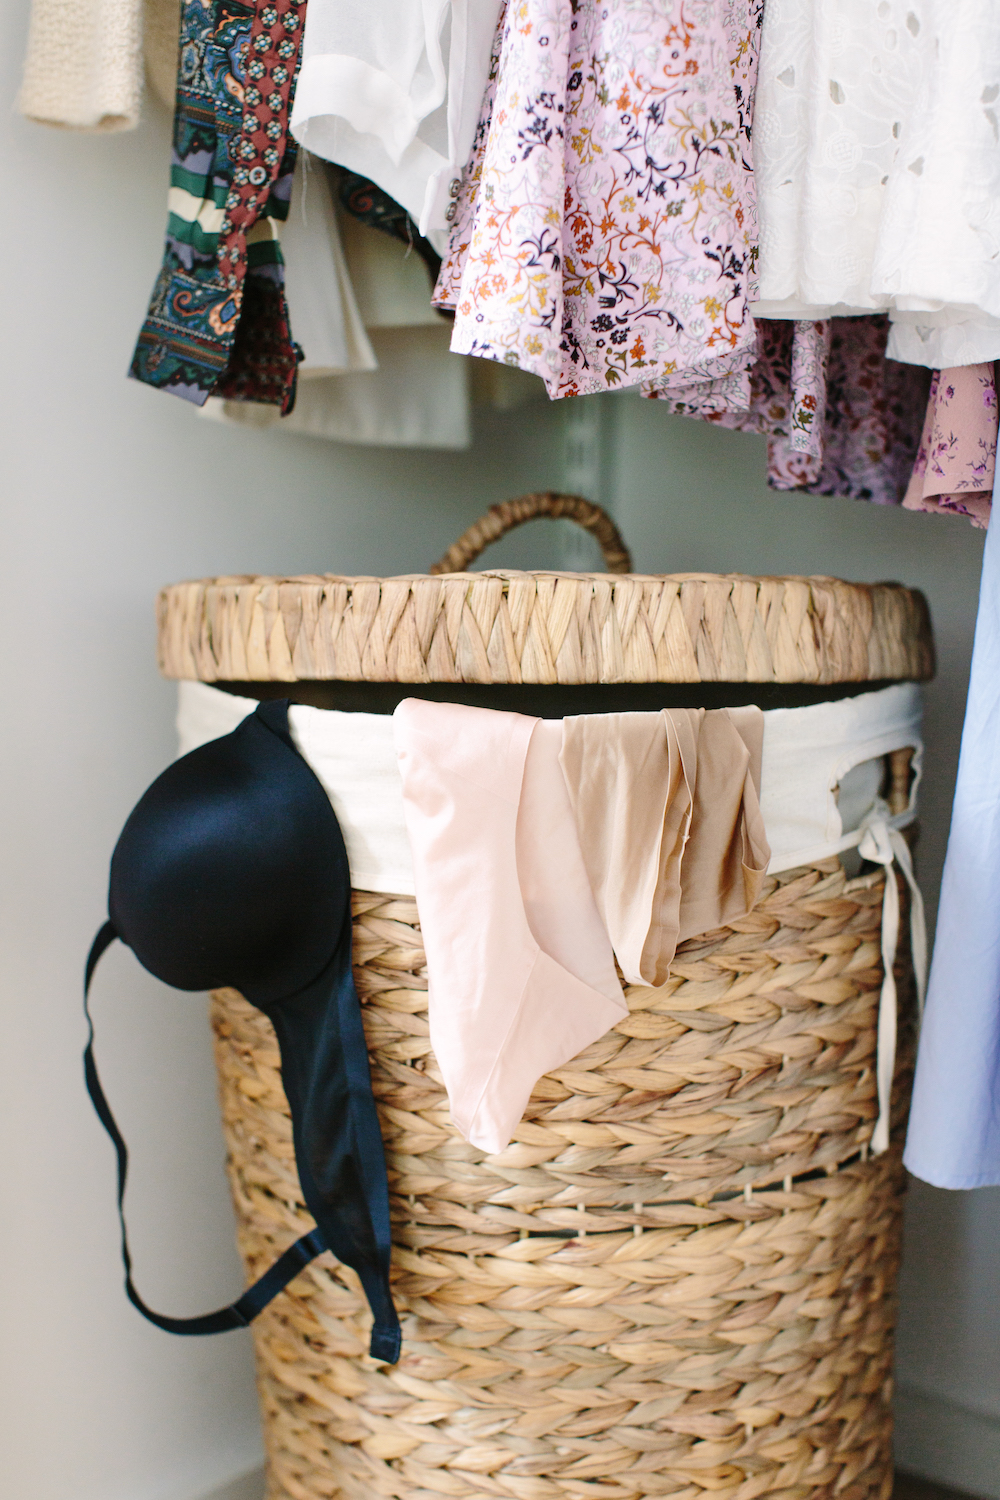 how to properly care for your bras and underwear and lingerie